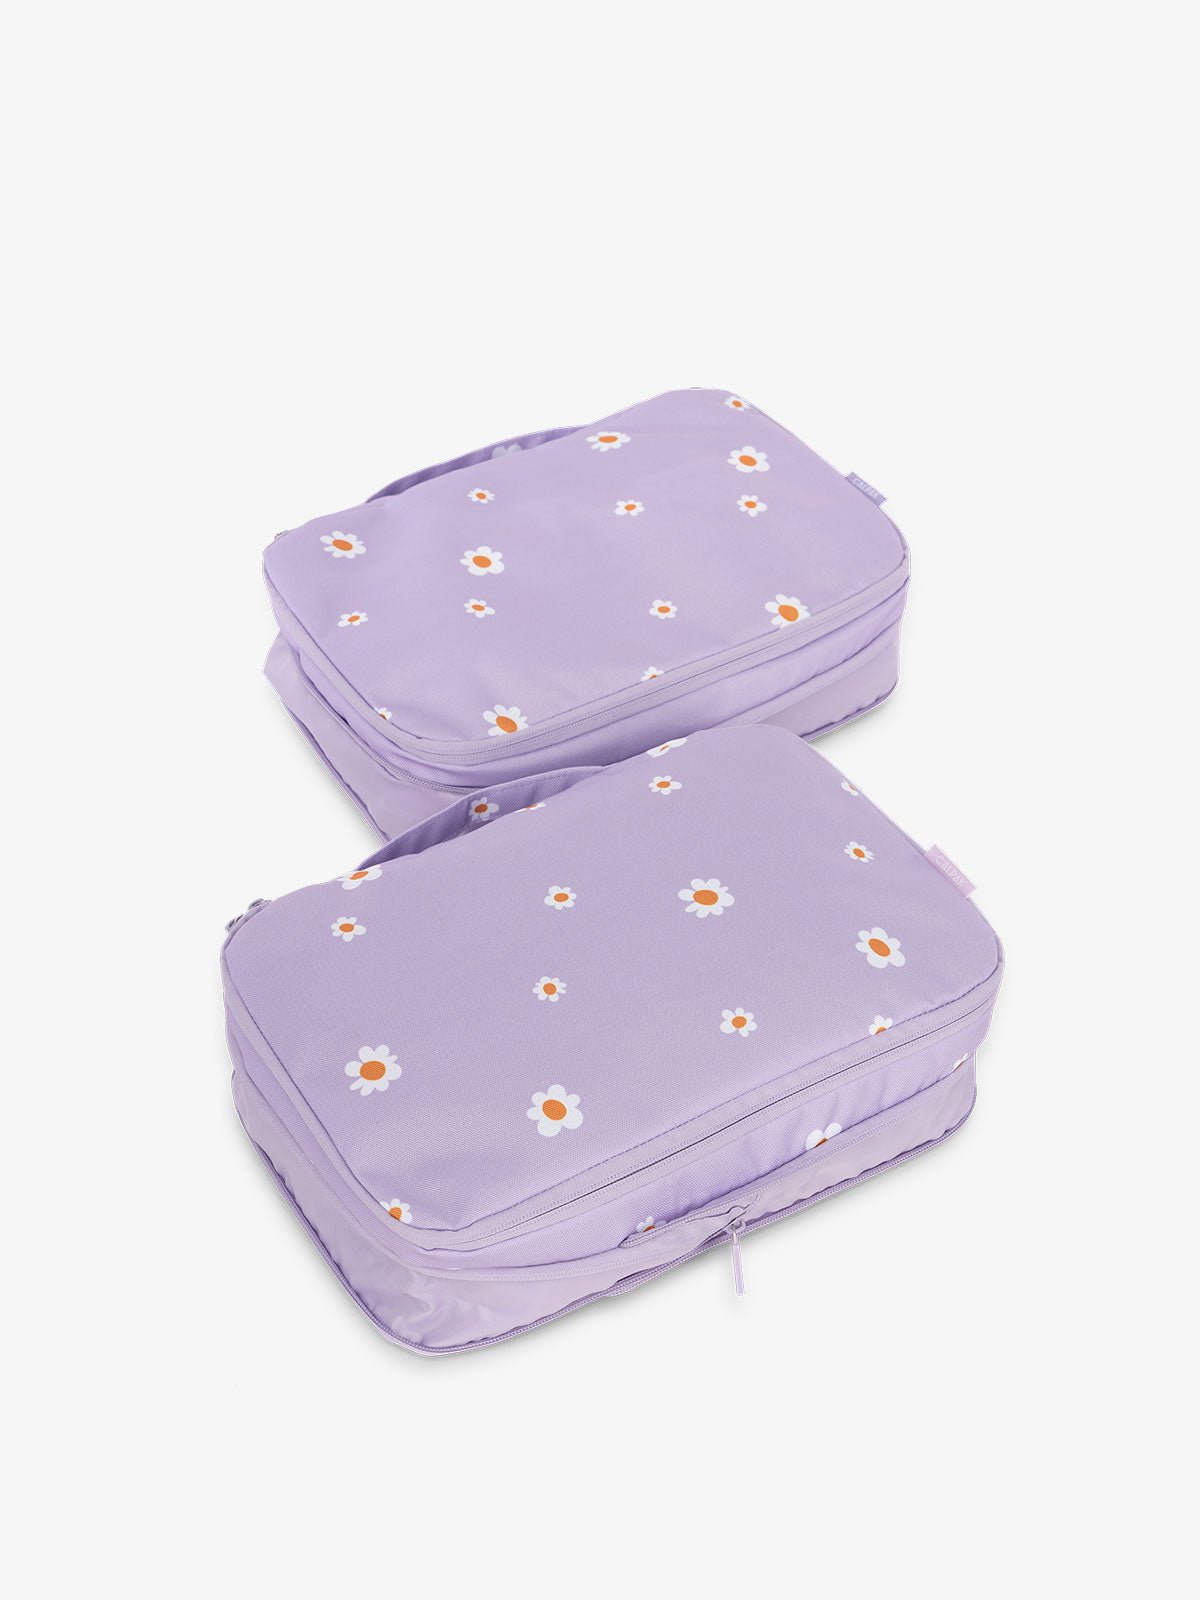 CALPAK compression packing cubes with handles in purple floral print